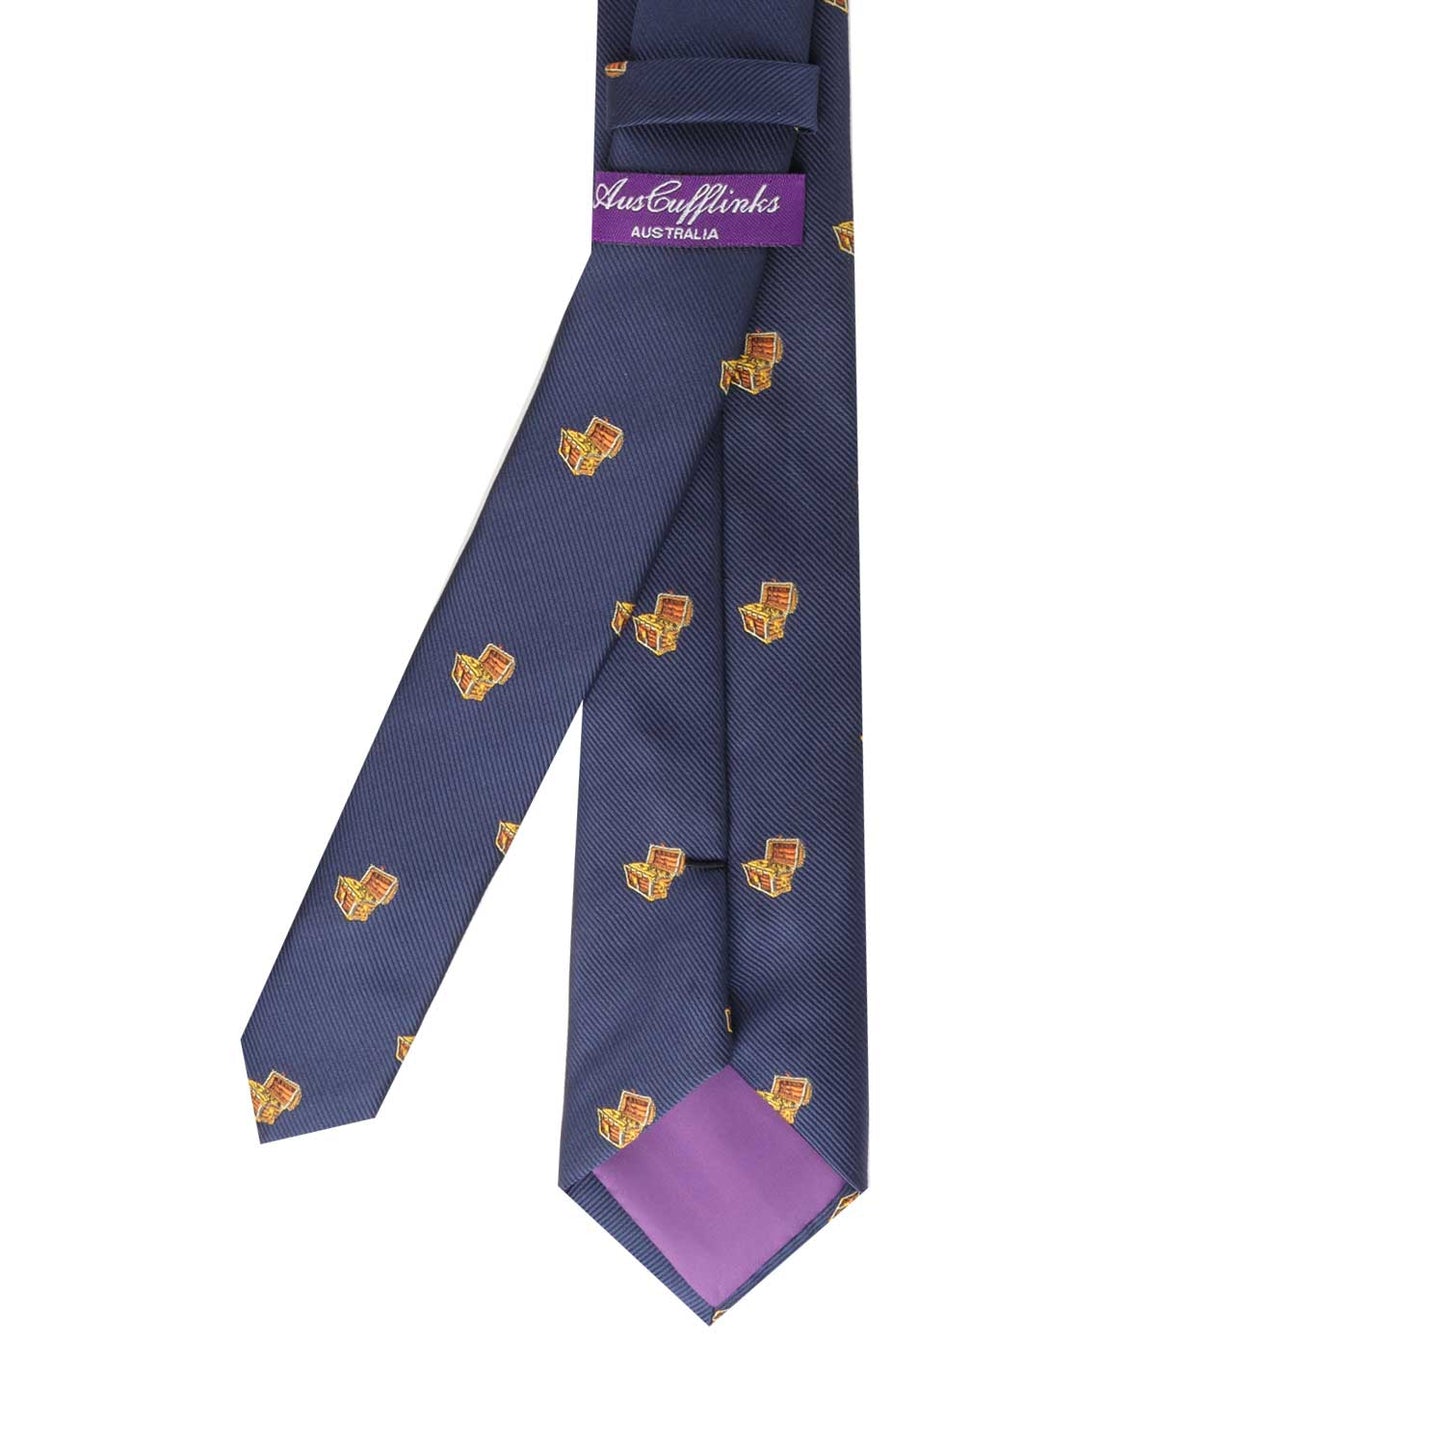 Treasure Chest Skinny Tie with shield emblems and an adventure-themed contrasting purple tail displayed on a white background.